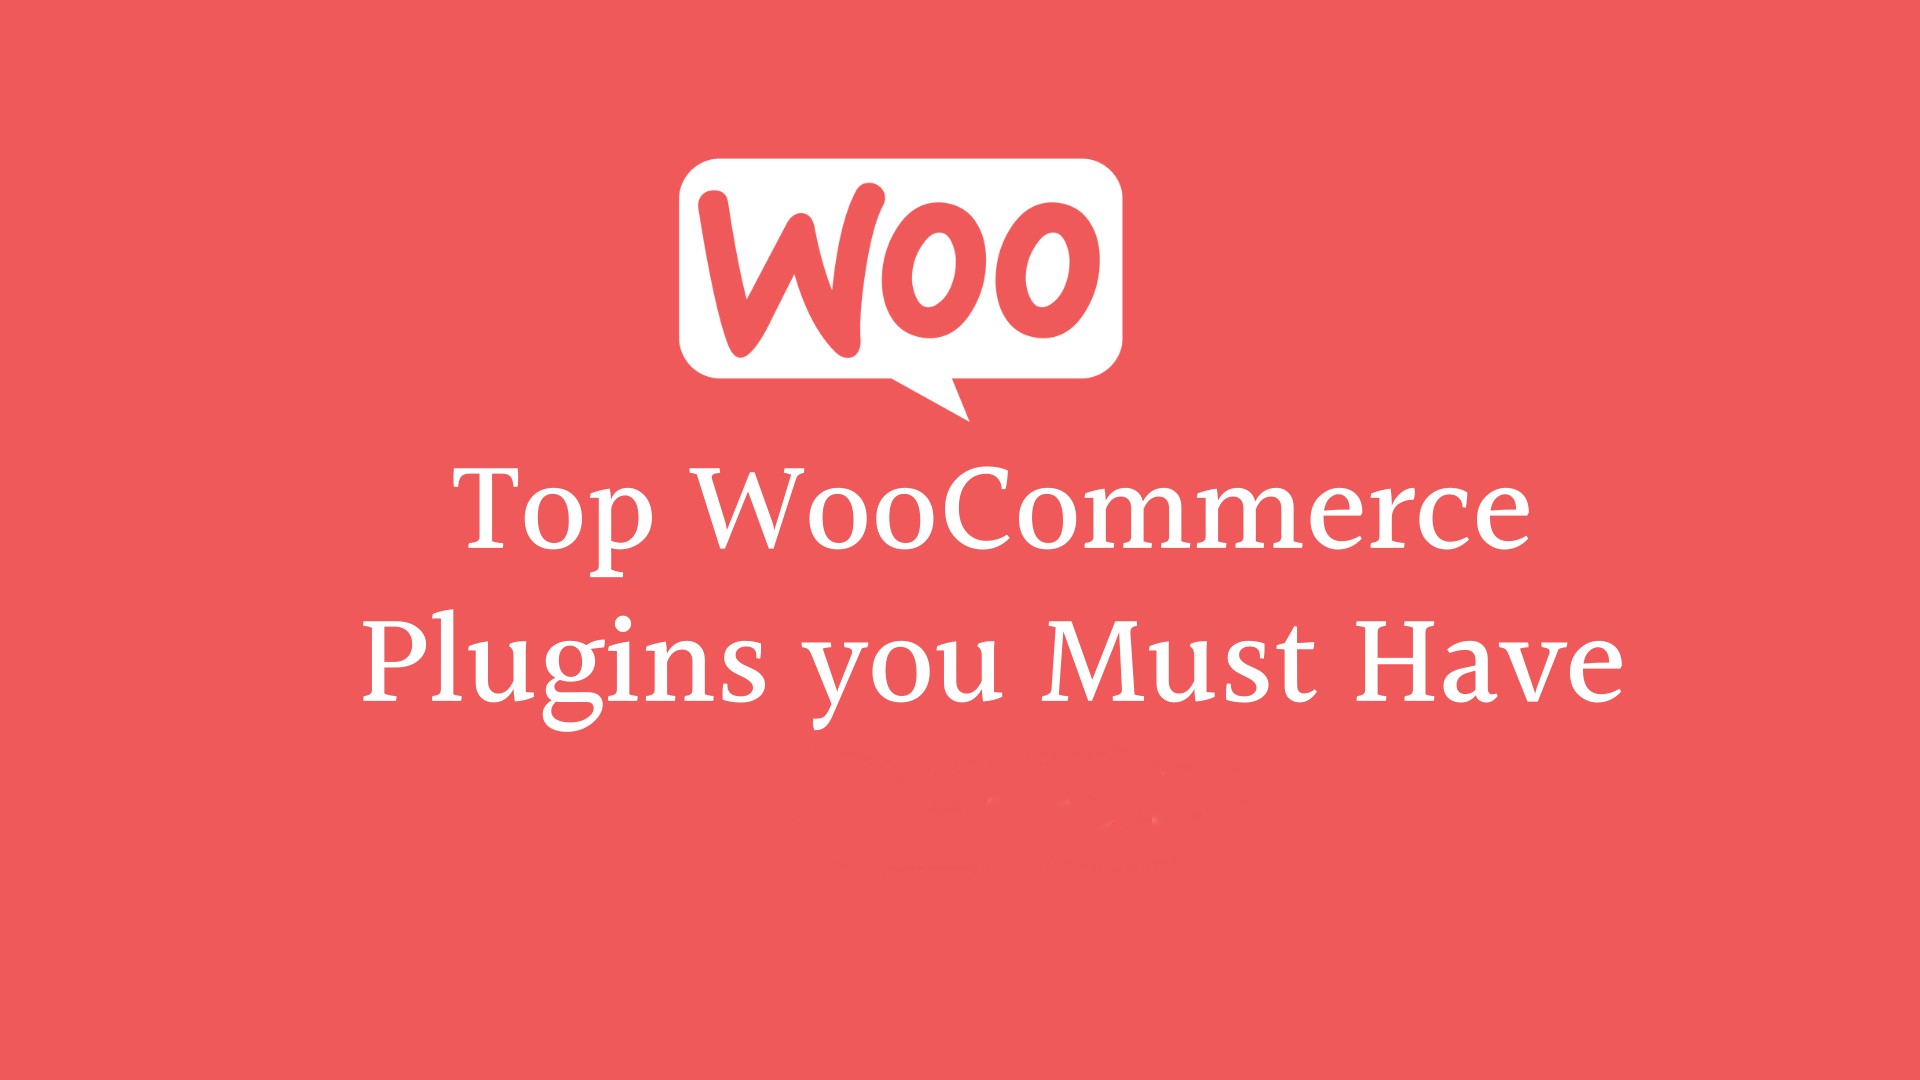 Top WooCommerce Plugins you Must Have